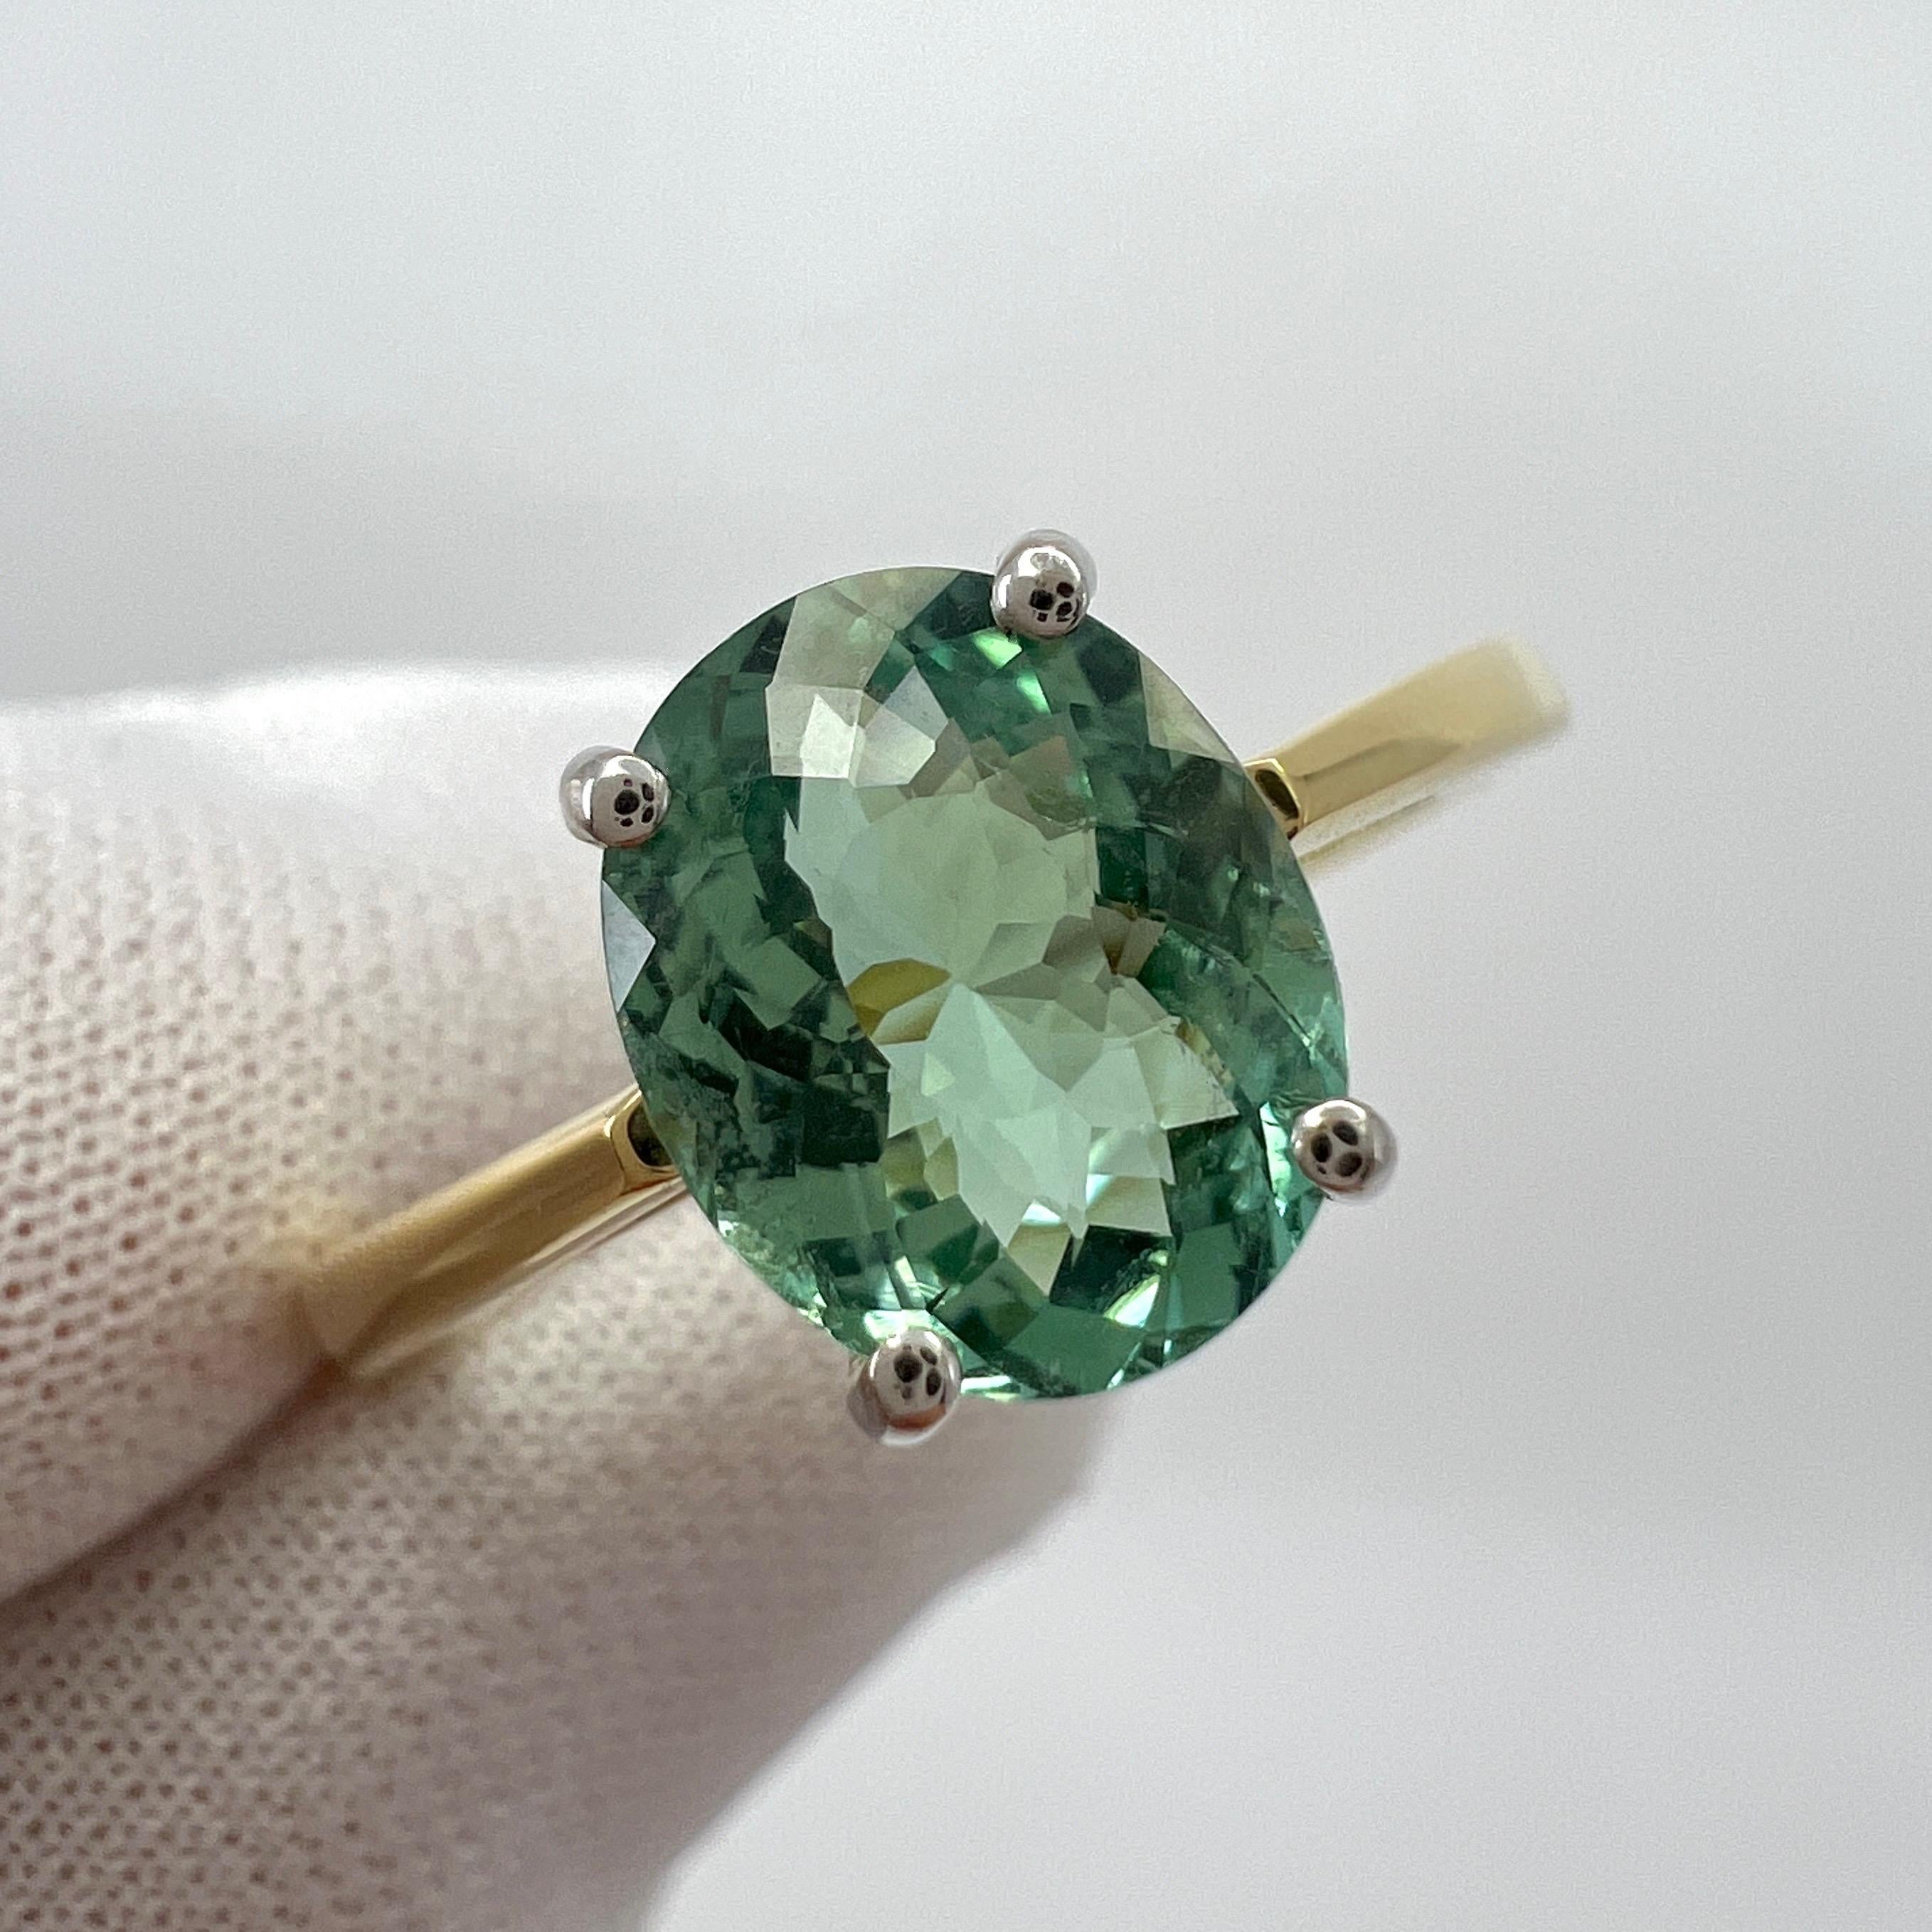 Vivid Blue Green Tourmaline Oval Cut 18k Yellow And White Gold Solitaire Ring.

1.75 Carat tourmaline with a stunning vivid green blue colour and good clarity. Very clean stone, with only some small natural inclusions visible when looking closely.